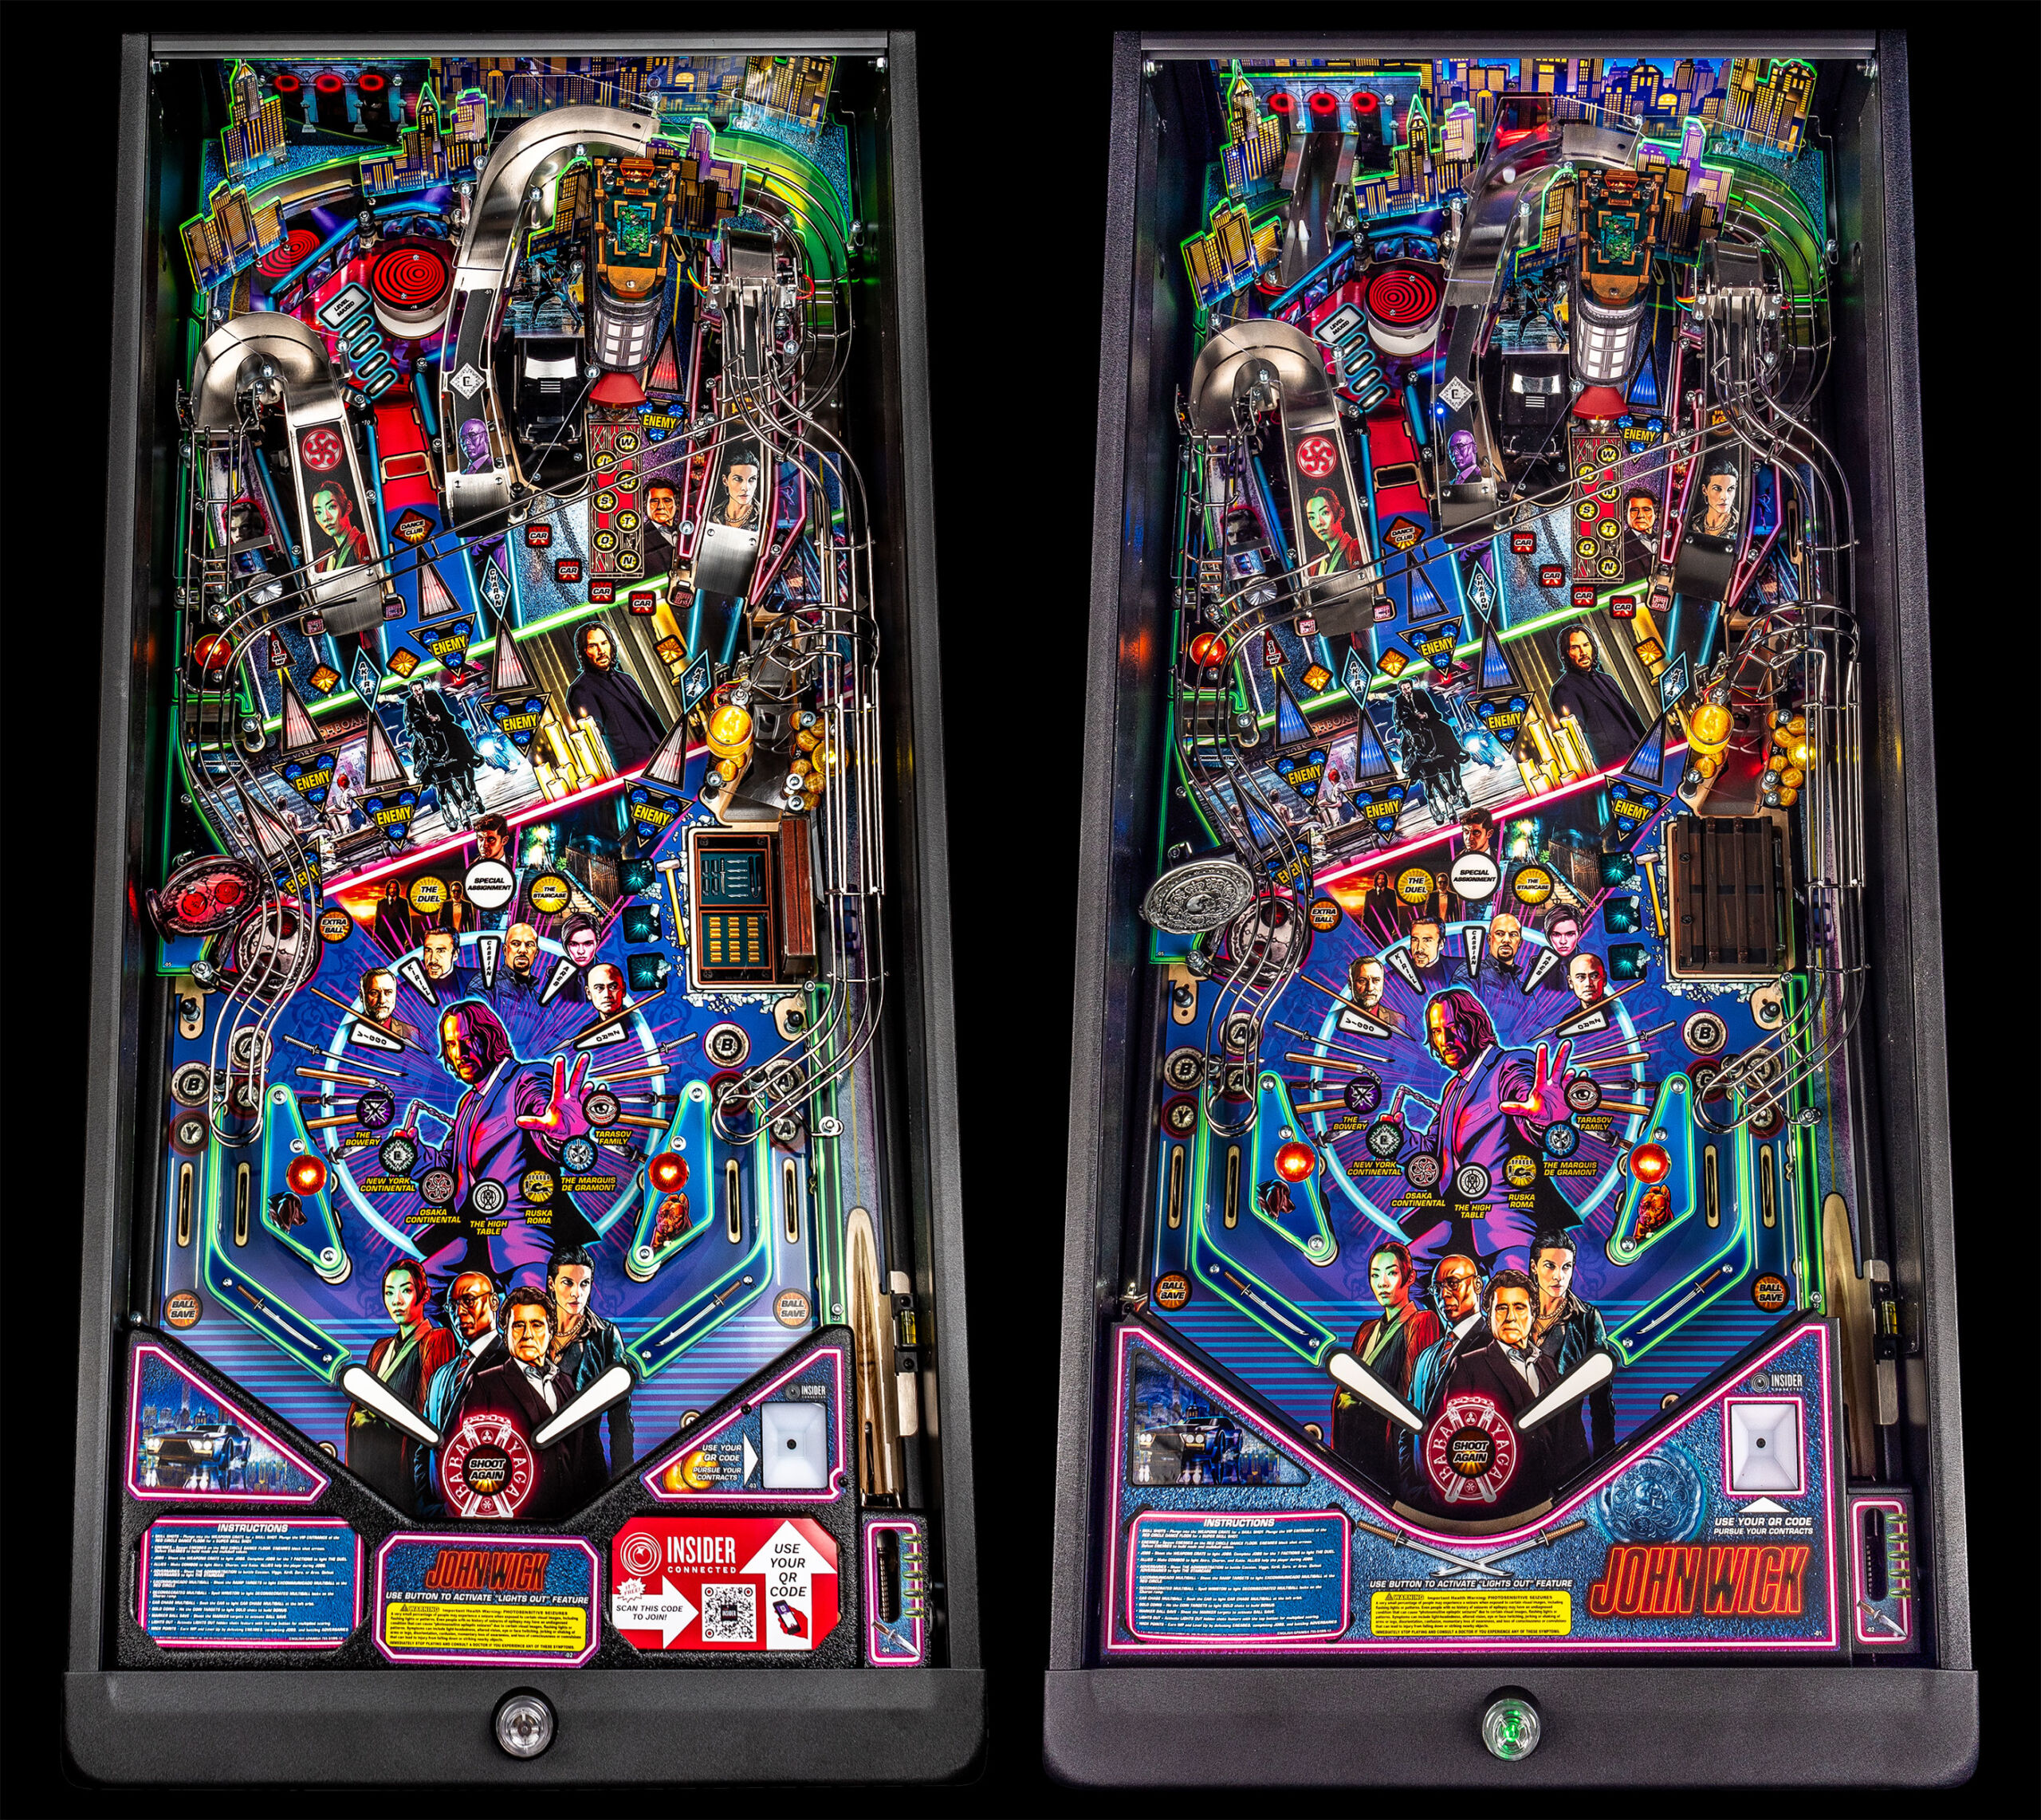 The Pro (L) and Premium (R) versions of the playfield are similar, but the Premium includes a few more shots and interactive elements.